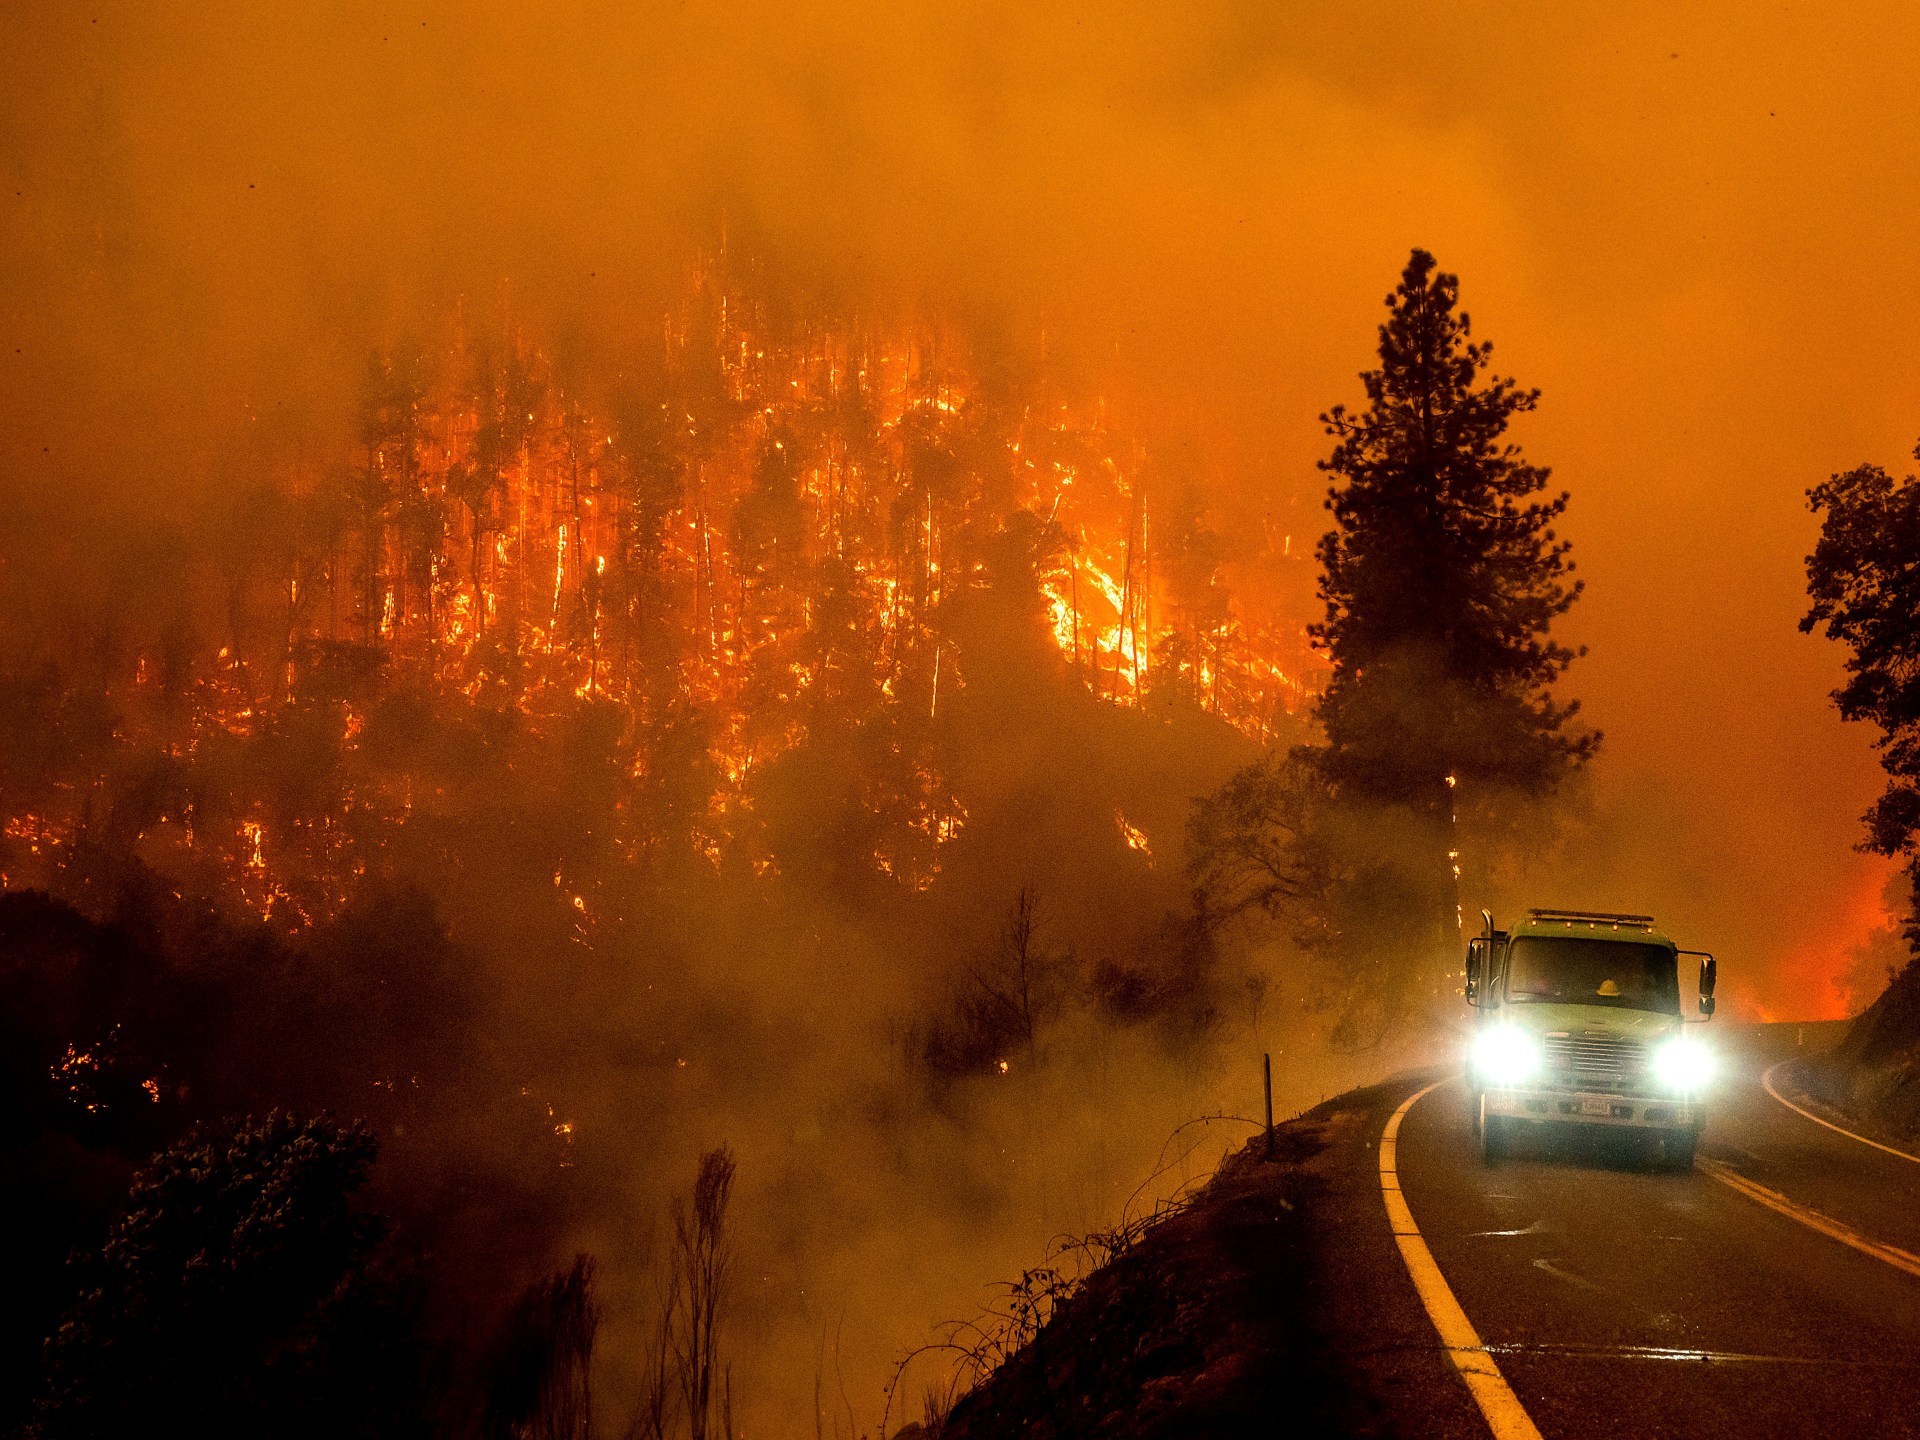 Thousands flee, several hurt as wildfire scorches California